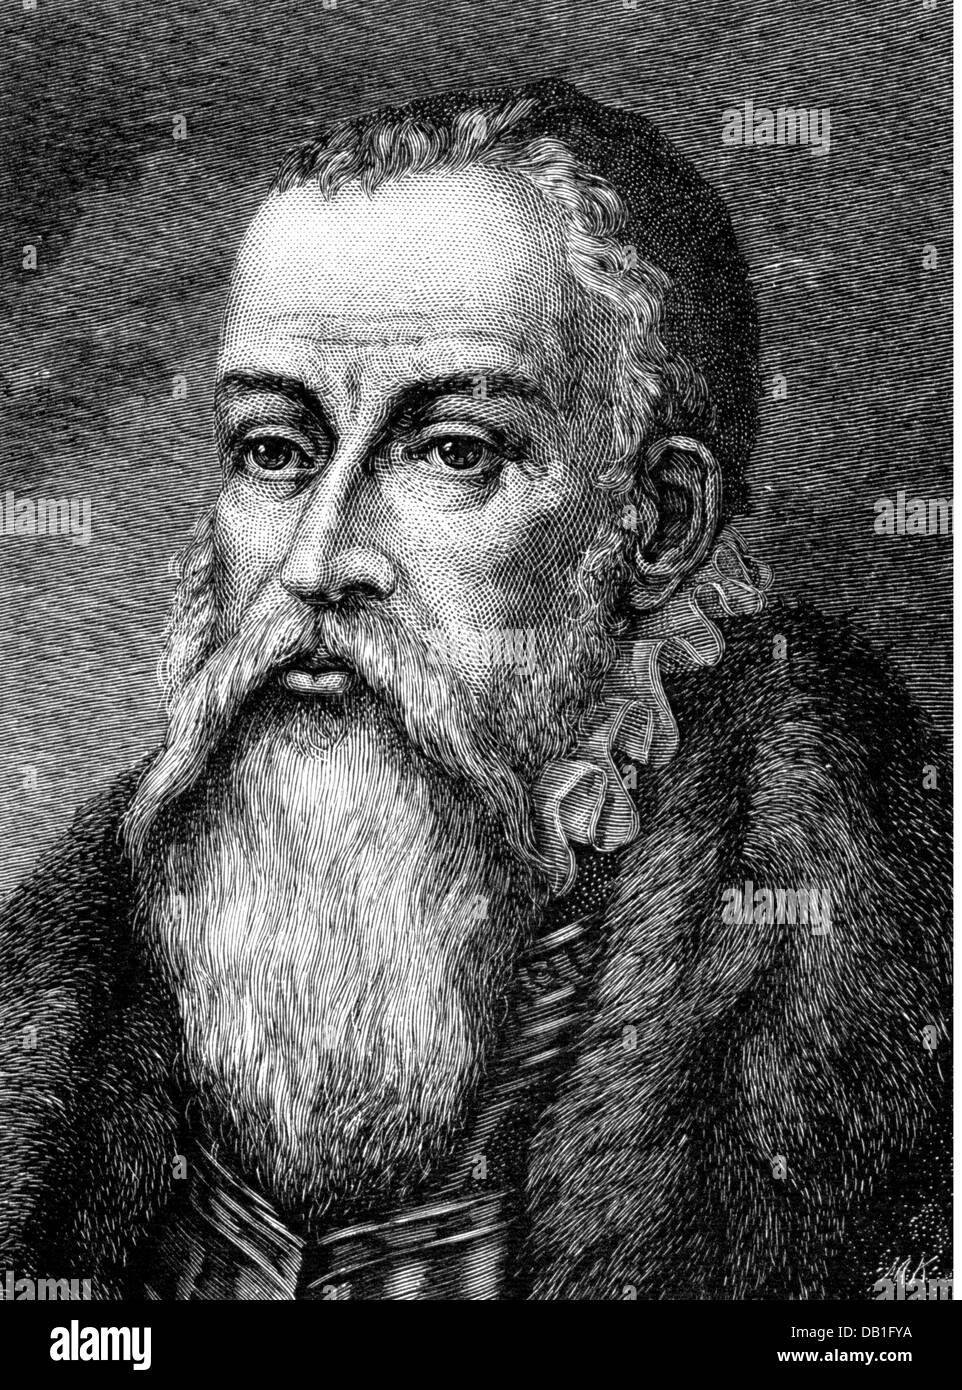 Maurice, 21.3.1521 - 11.7.1553, Prince-Elector of Saxony 18.8.1547 - 11.7.1553, portrait, after copper engraving, wood engraving, 19th century, Artist's Copyright has not to be cleared Stock Photo